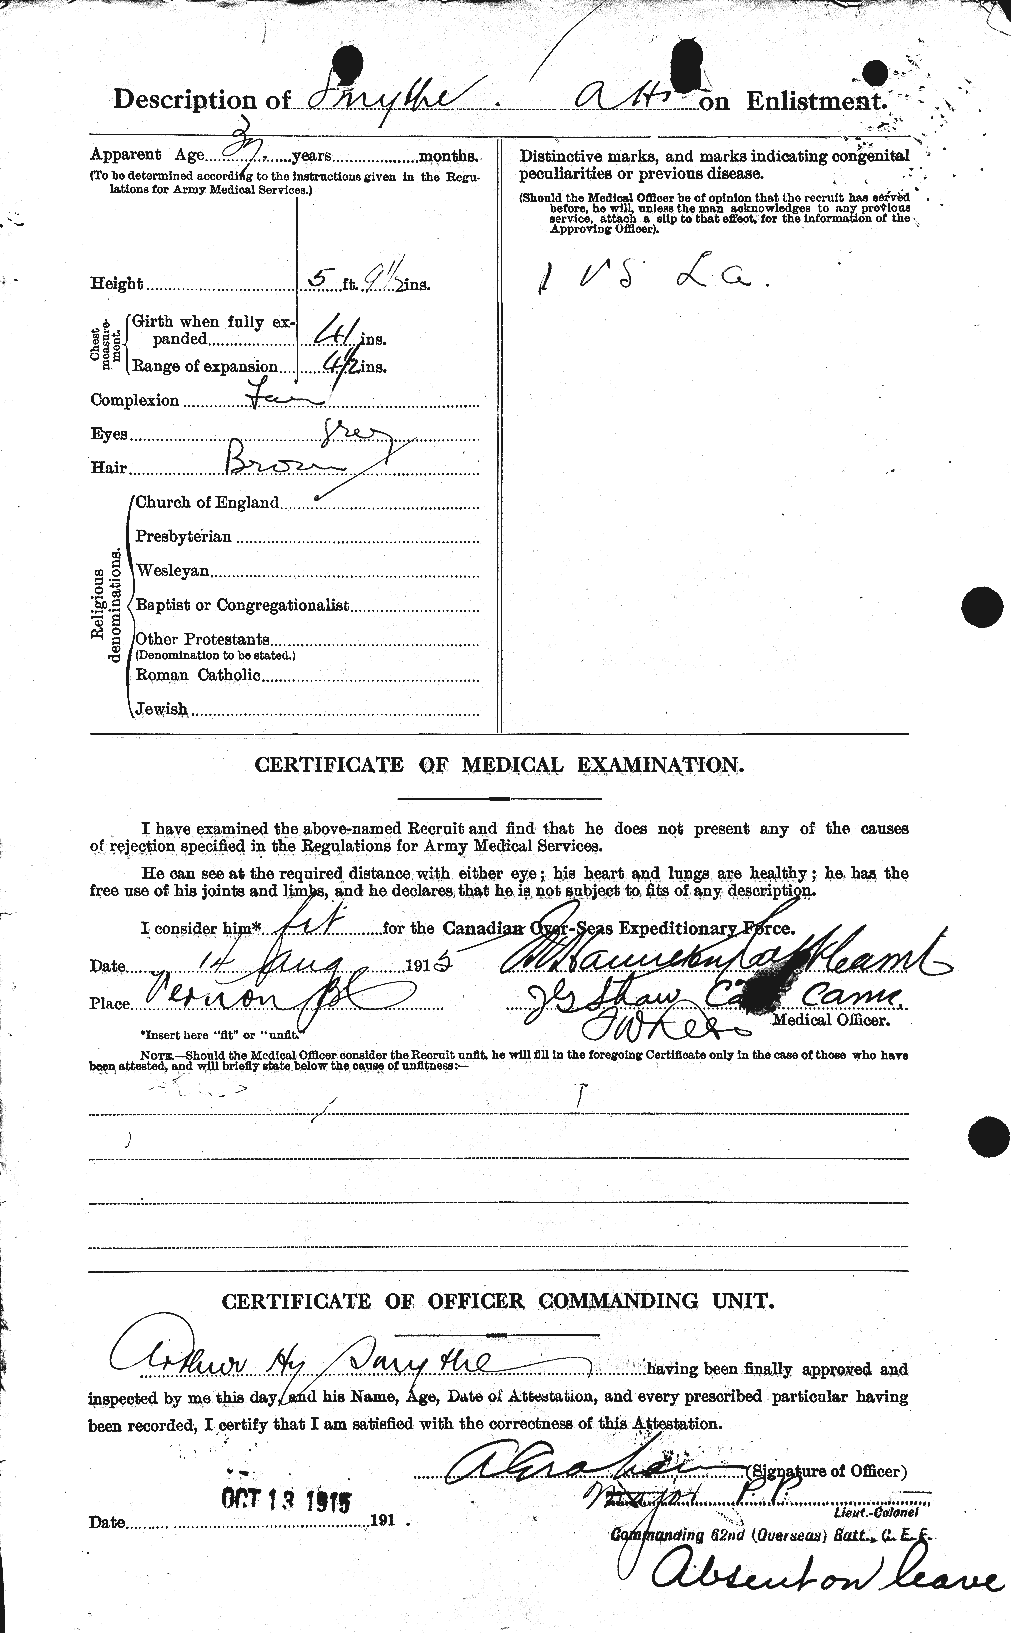 Personnel Records of the First World War - CEF 105871b